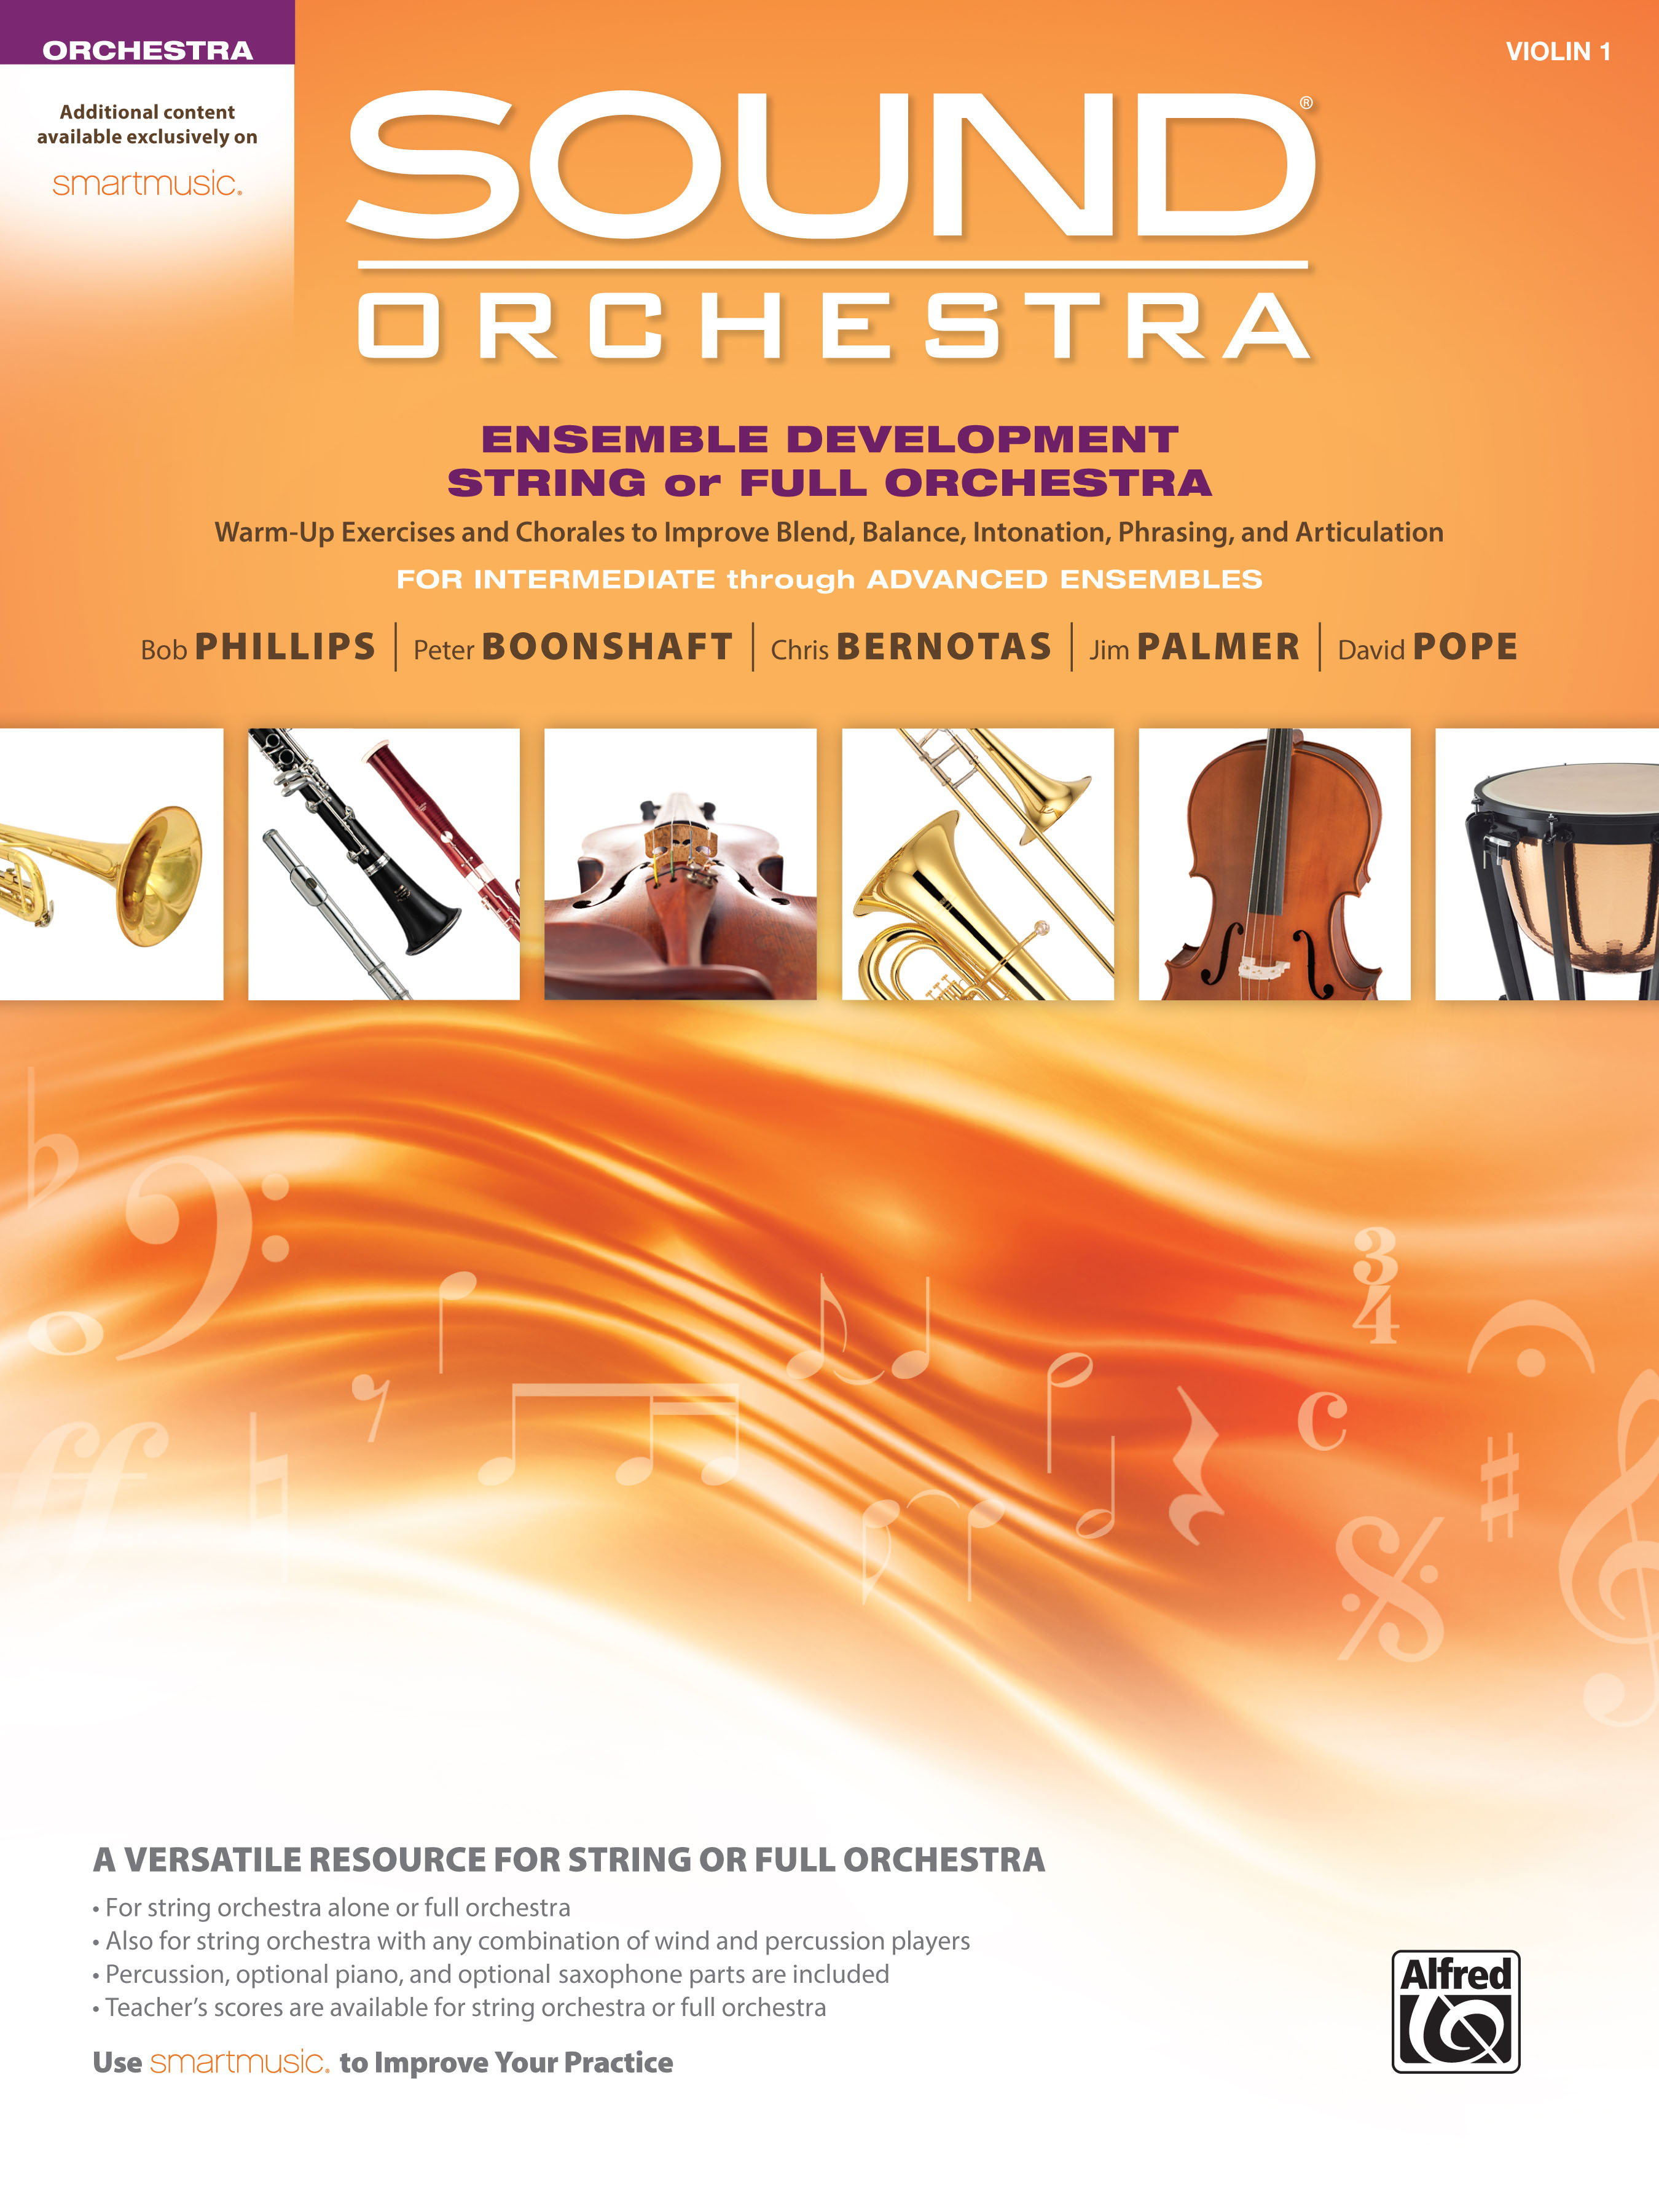 Sound Orchestra: Ensemble Development for String or Full Orchestra